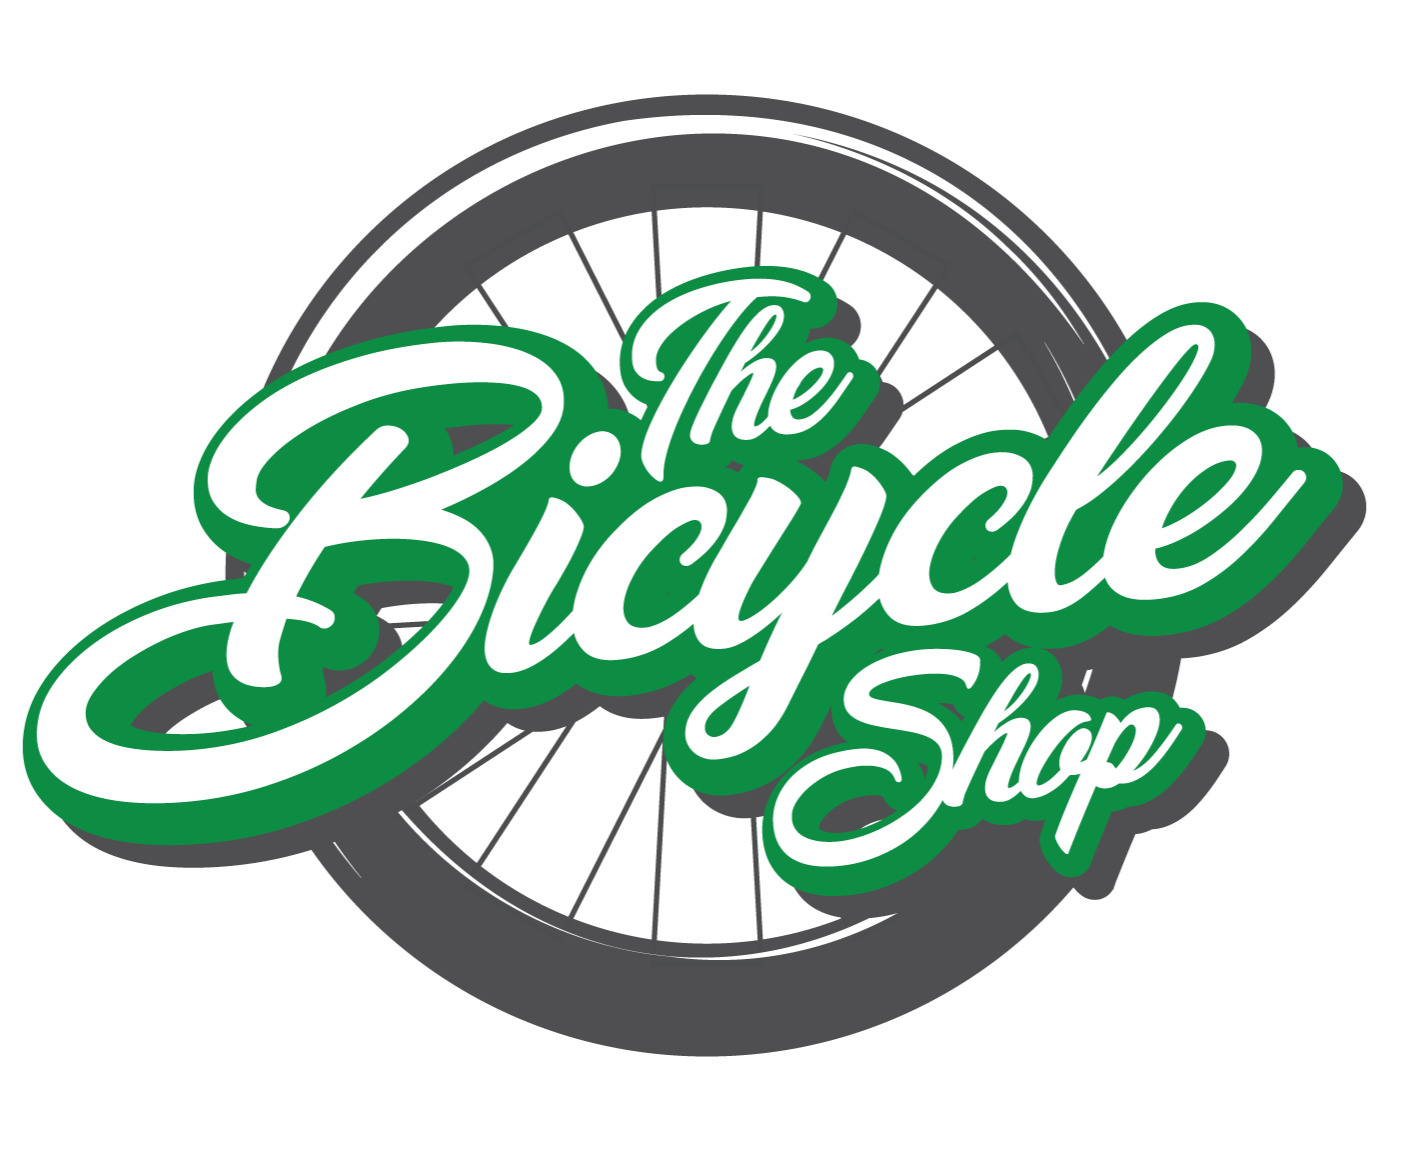 The Bicycle Shop Logo